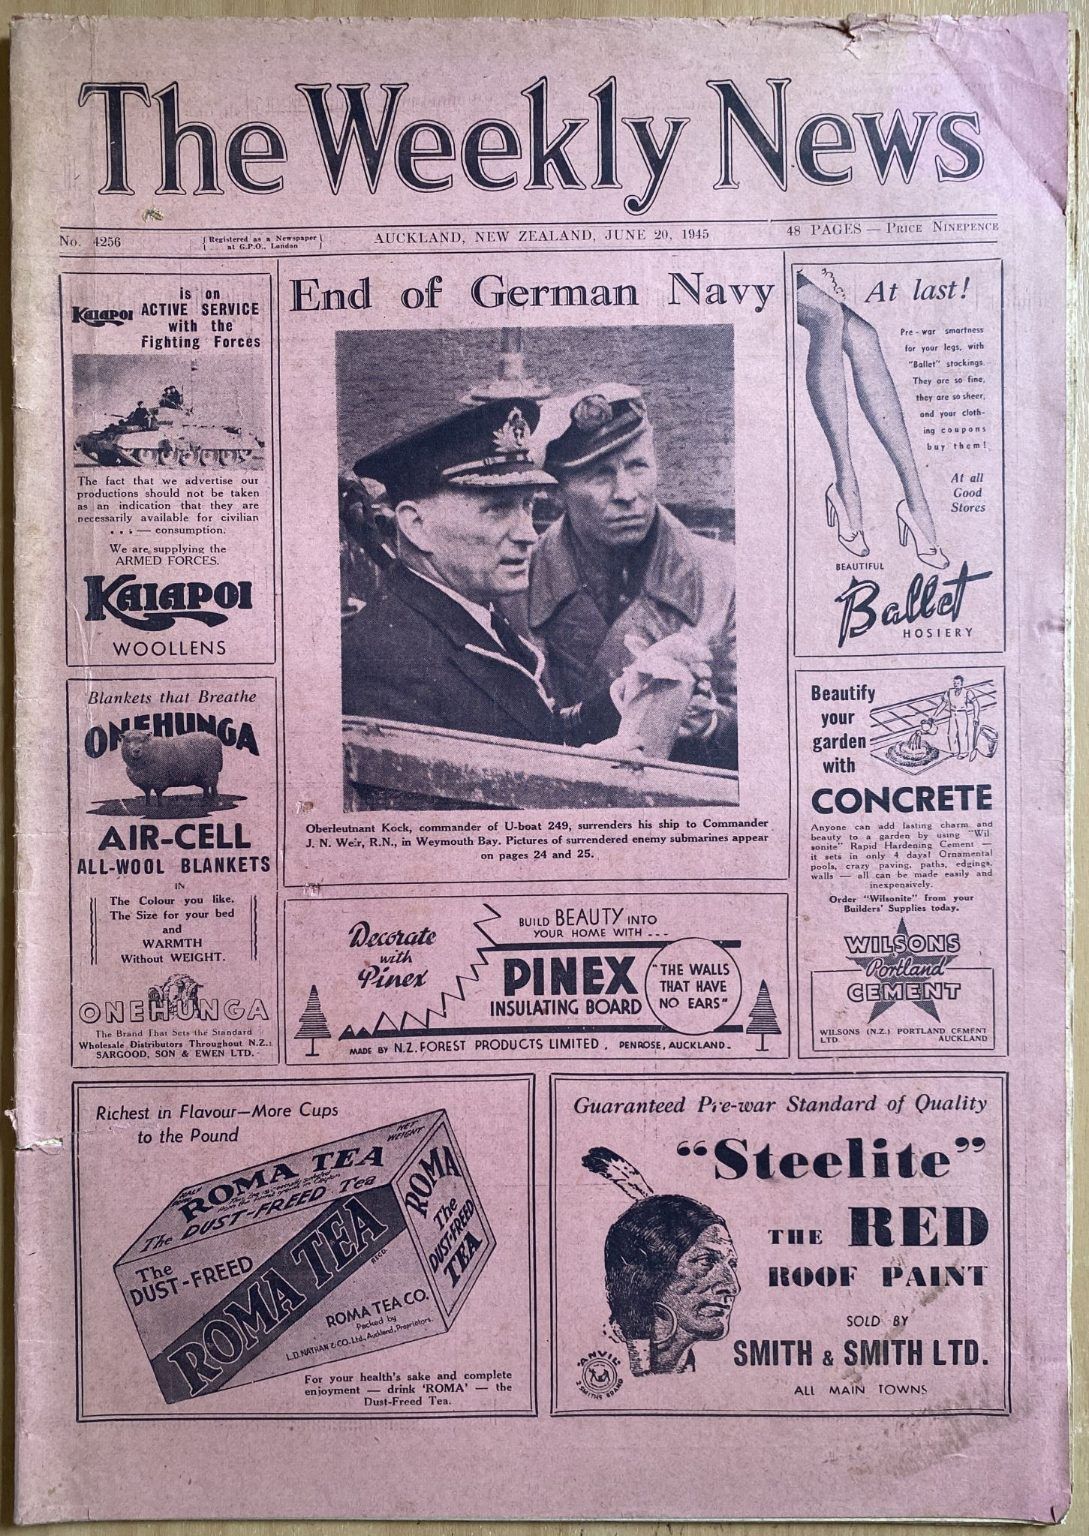 OLD NEWSPAPER: The Weekly News - No. 4256, 20 June 1945